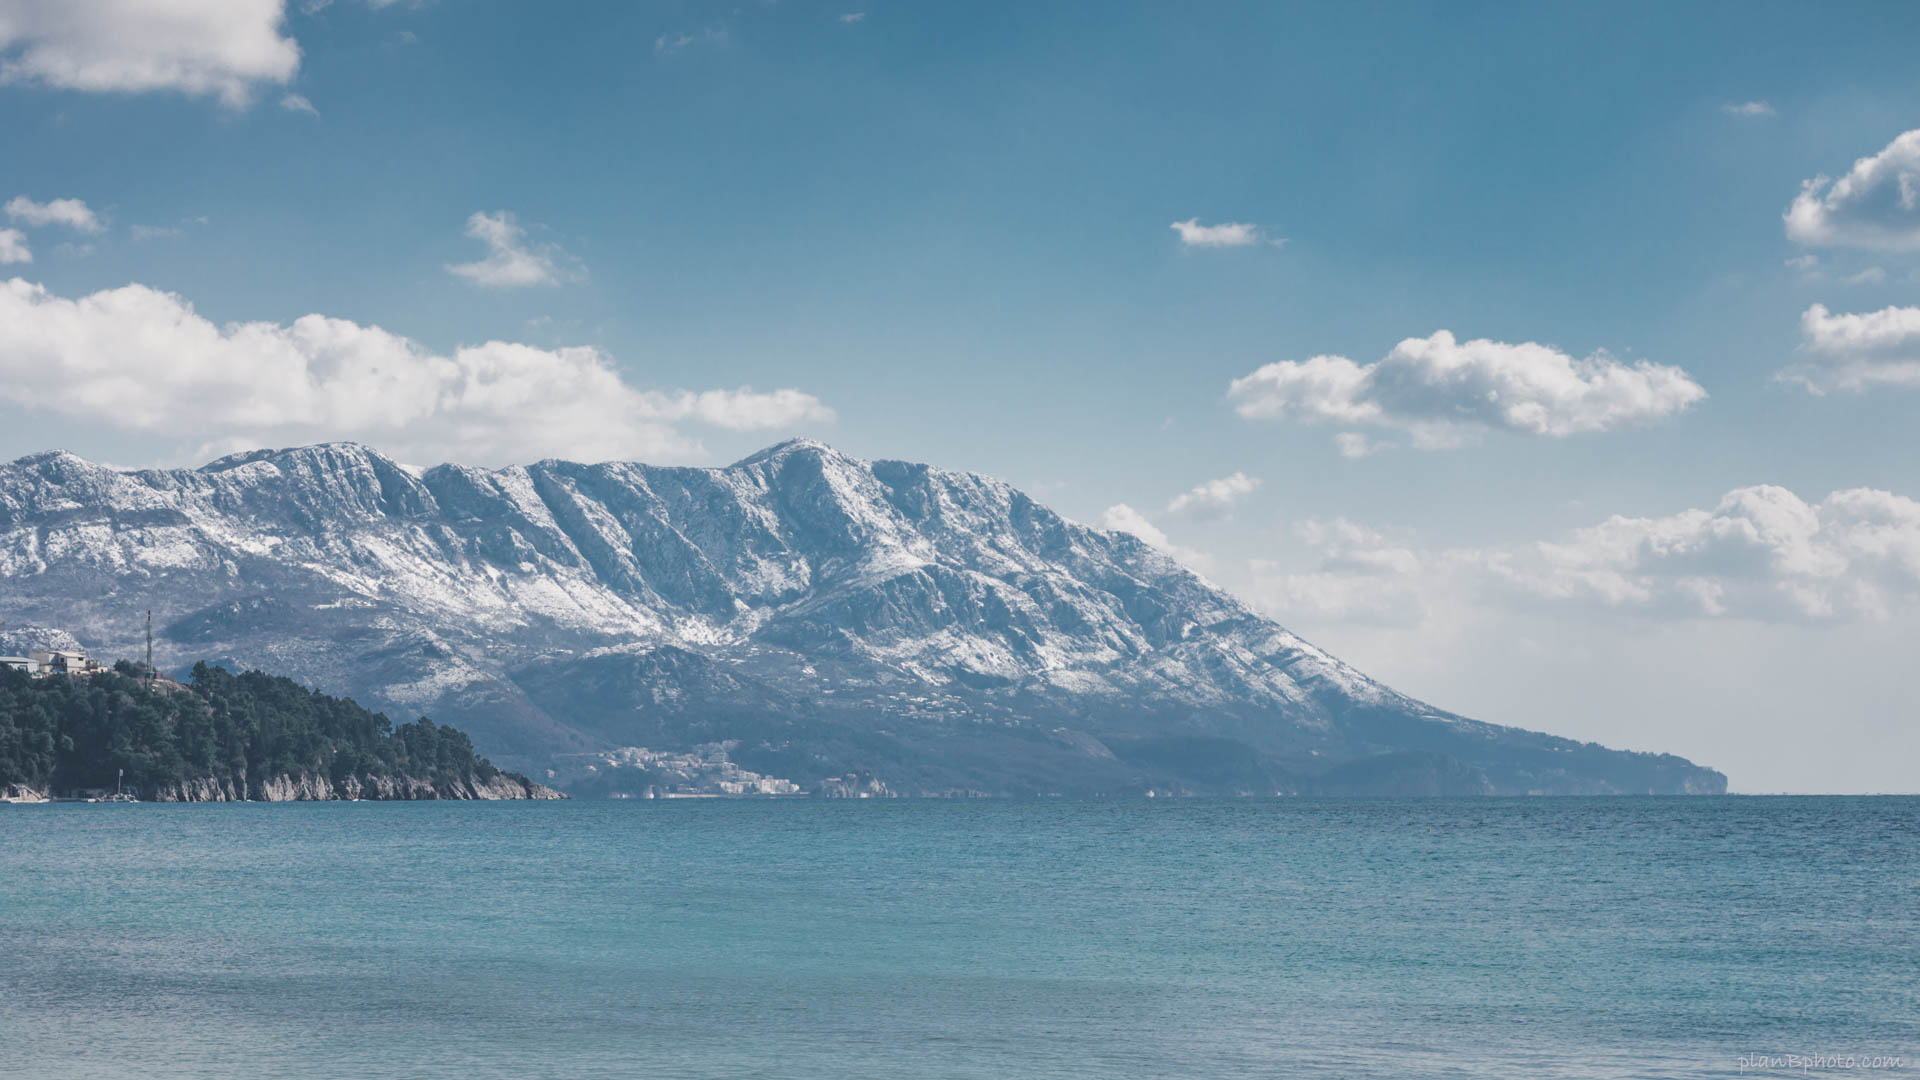 Mountain covered in snow by the blue sea